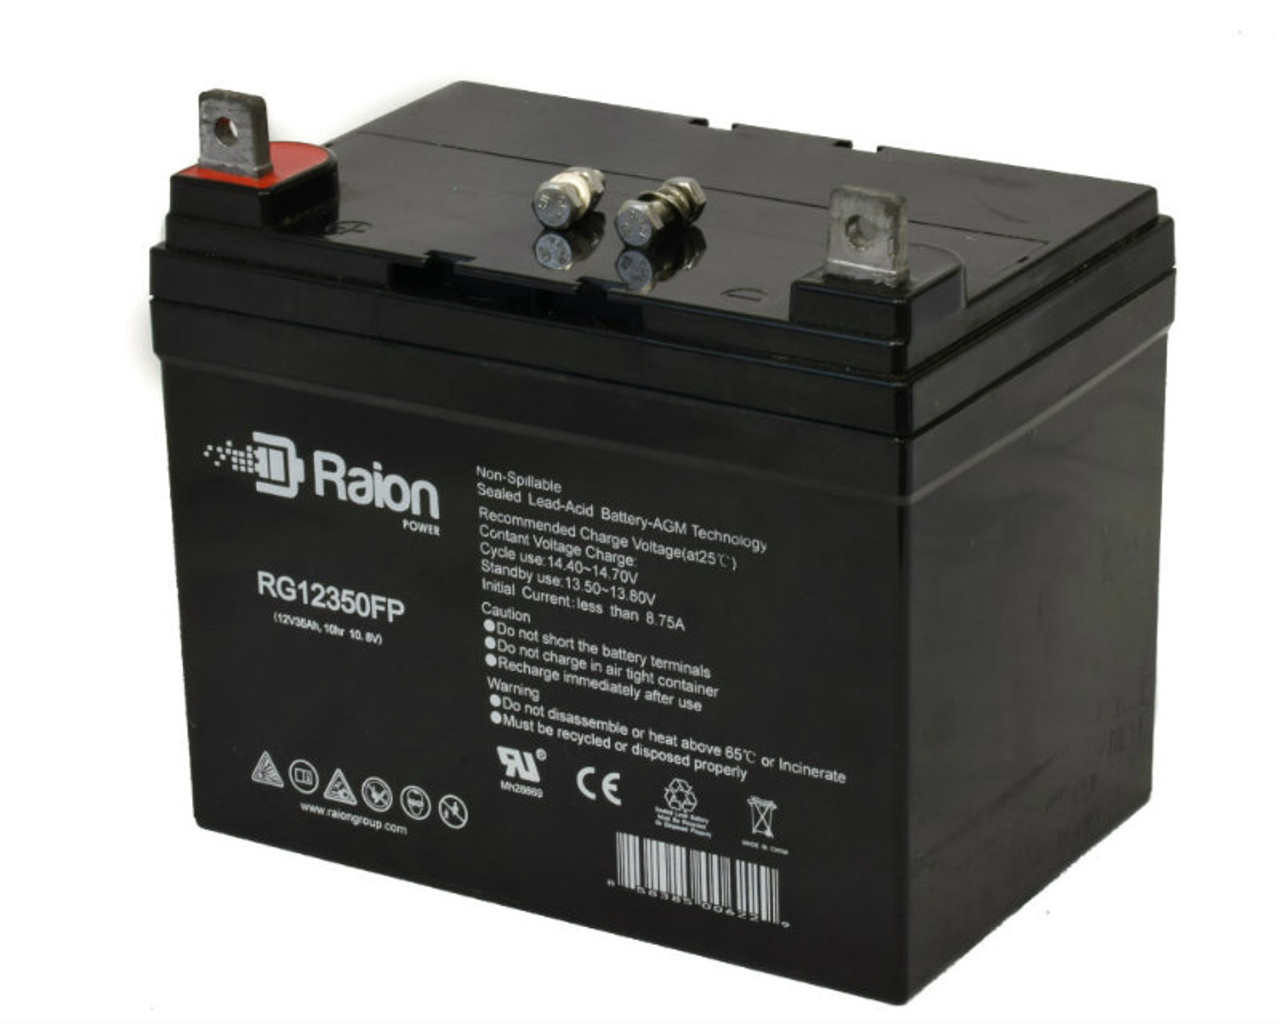 Raion Power Replacement 12V 35Ah RG12350FP Mobility Scooter Battery for Everest & Jennings Wheelchairs Xcaliber